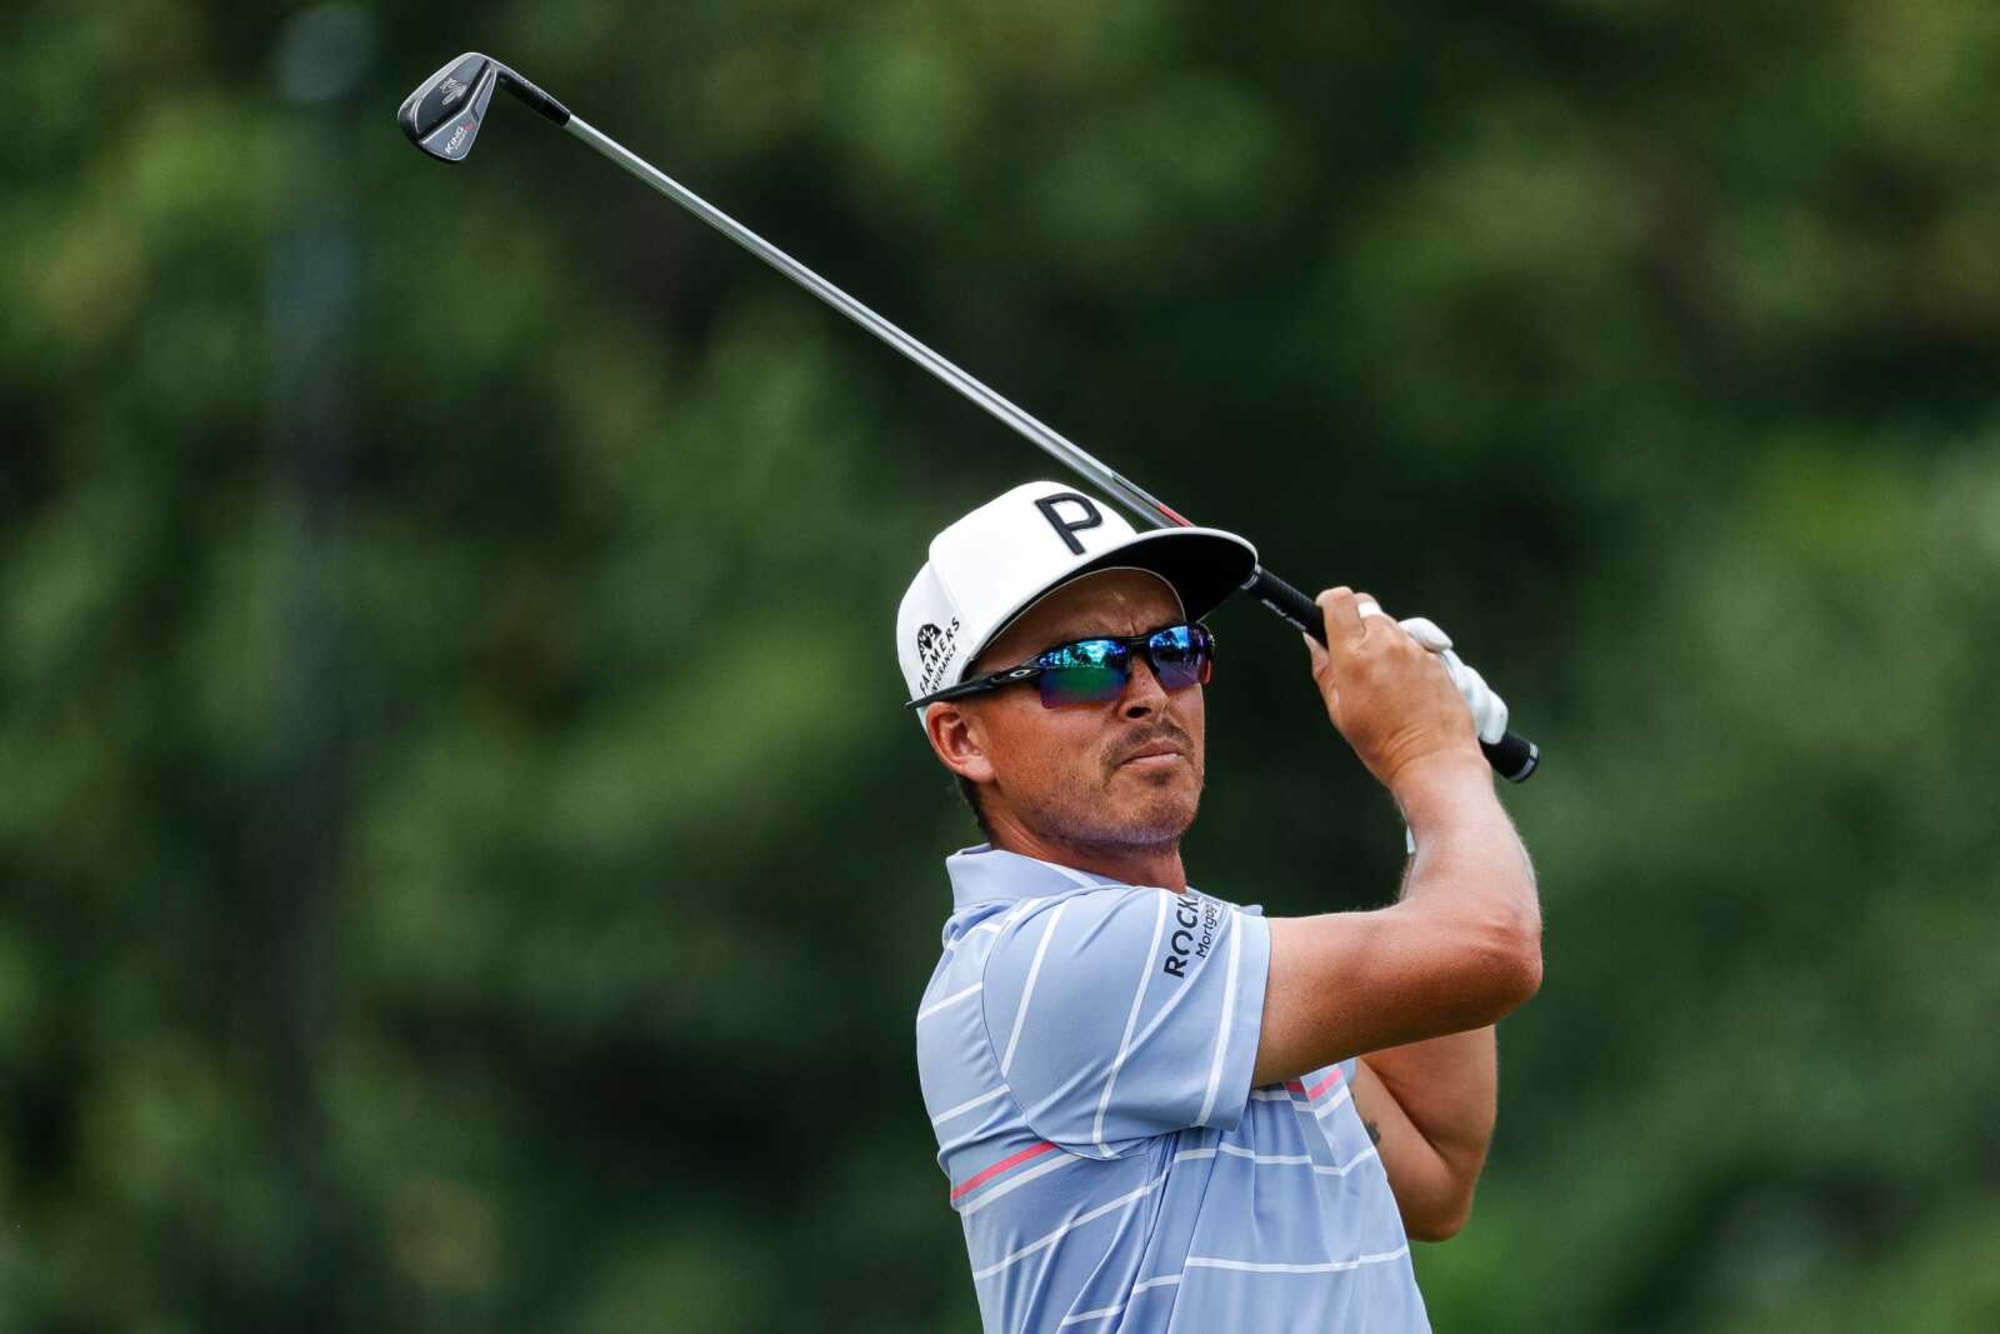 Fedex Cup Playoffs: Rickie Fowler just BARELY Slips into the Playoffs